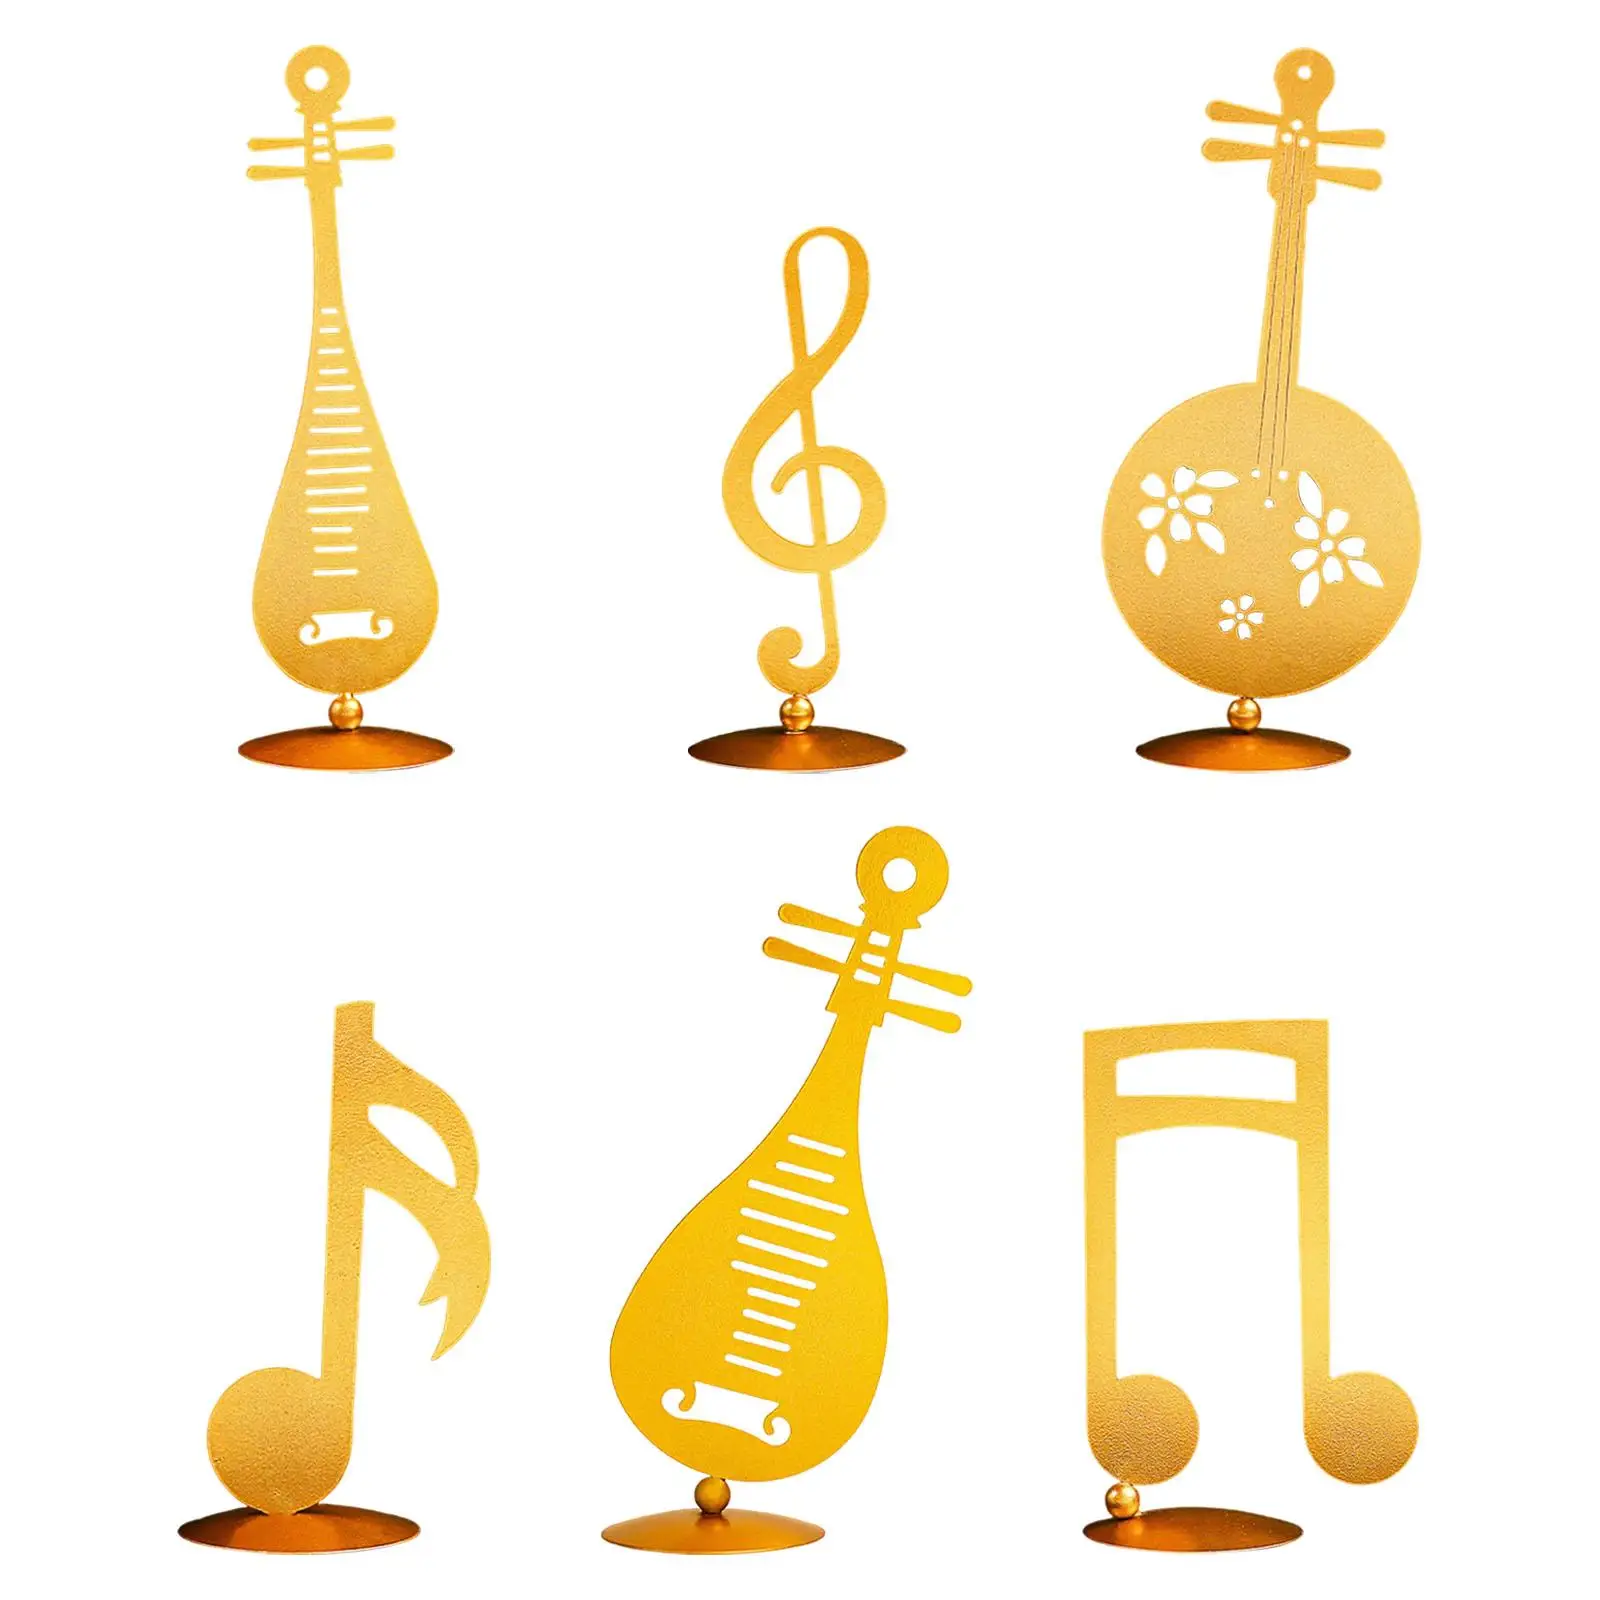 Golden Musical Note Statue Crafts Sculpture Figurine Tabletop Music Note Ornament for Home Cabinet Bedroom Decor Gifts Souvenirs